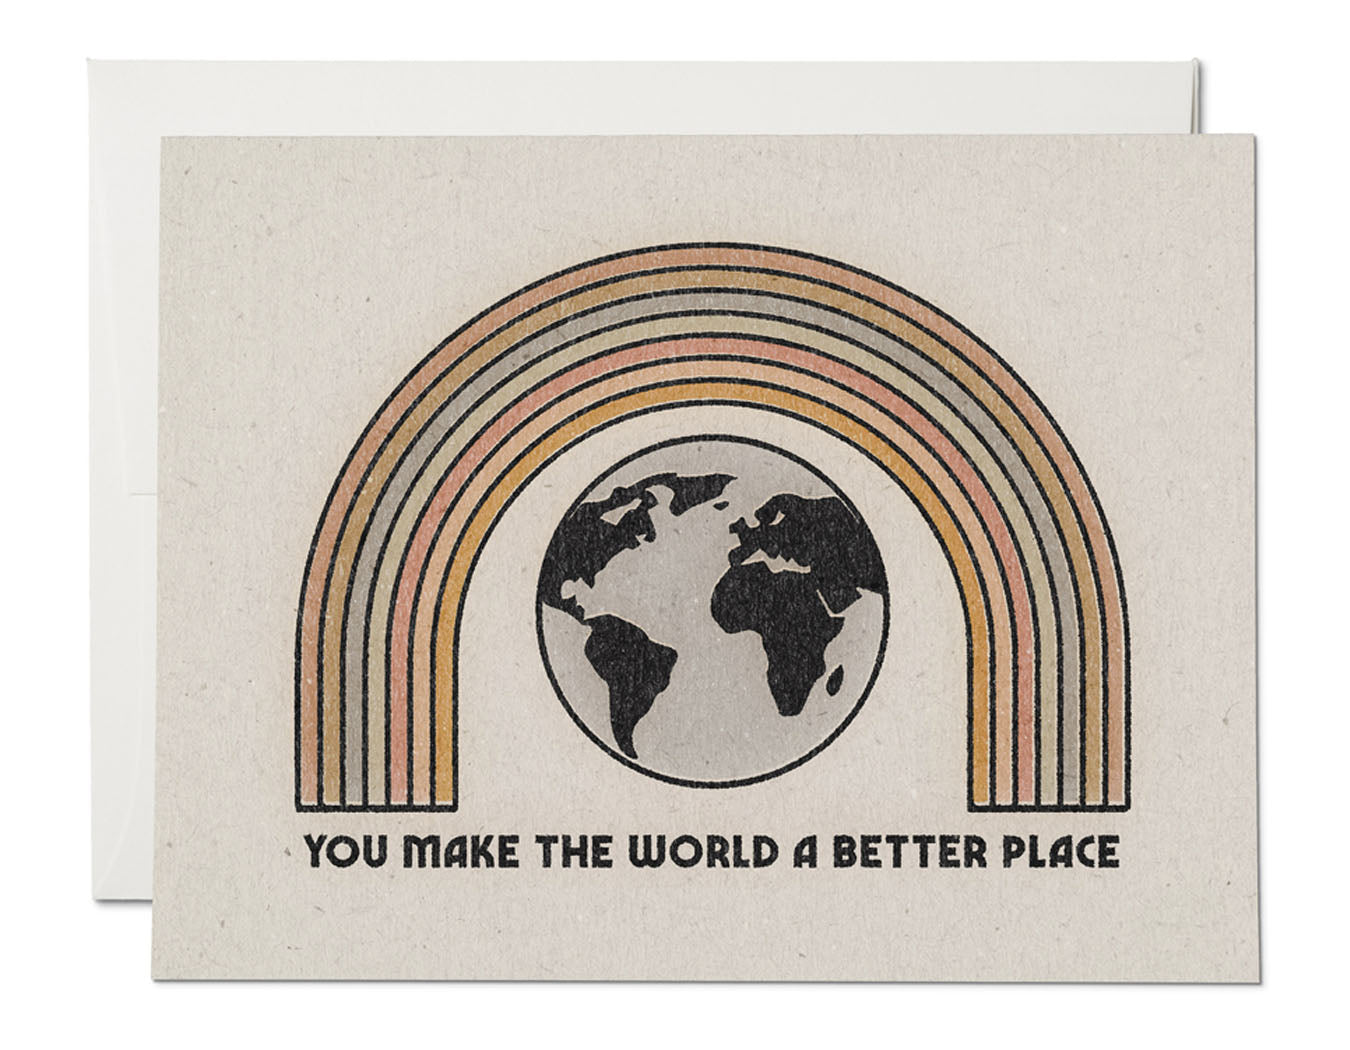 BEAUTIFUL MUTED COLORS OF A RAINBOW WITH A WORLD ILLUSTRATION TEXT READS YOU MAKE THE WORLD A BETTER PLACE